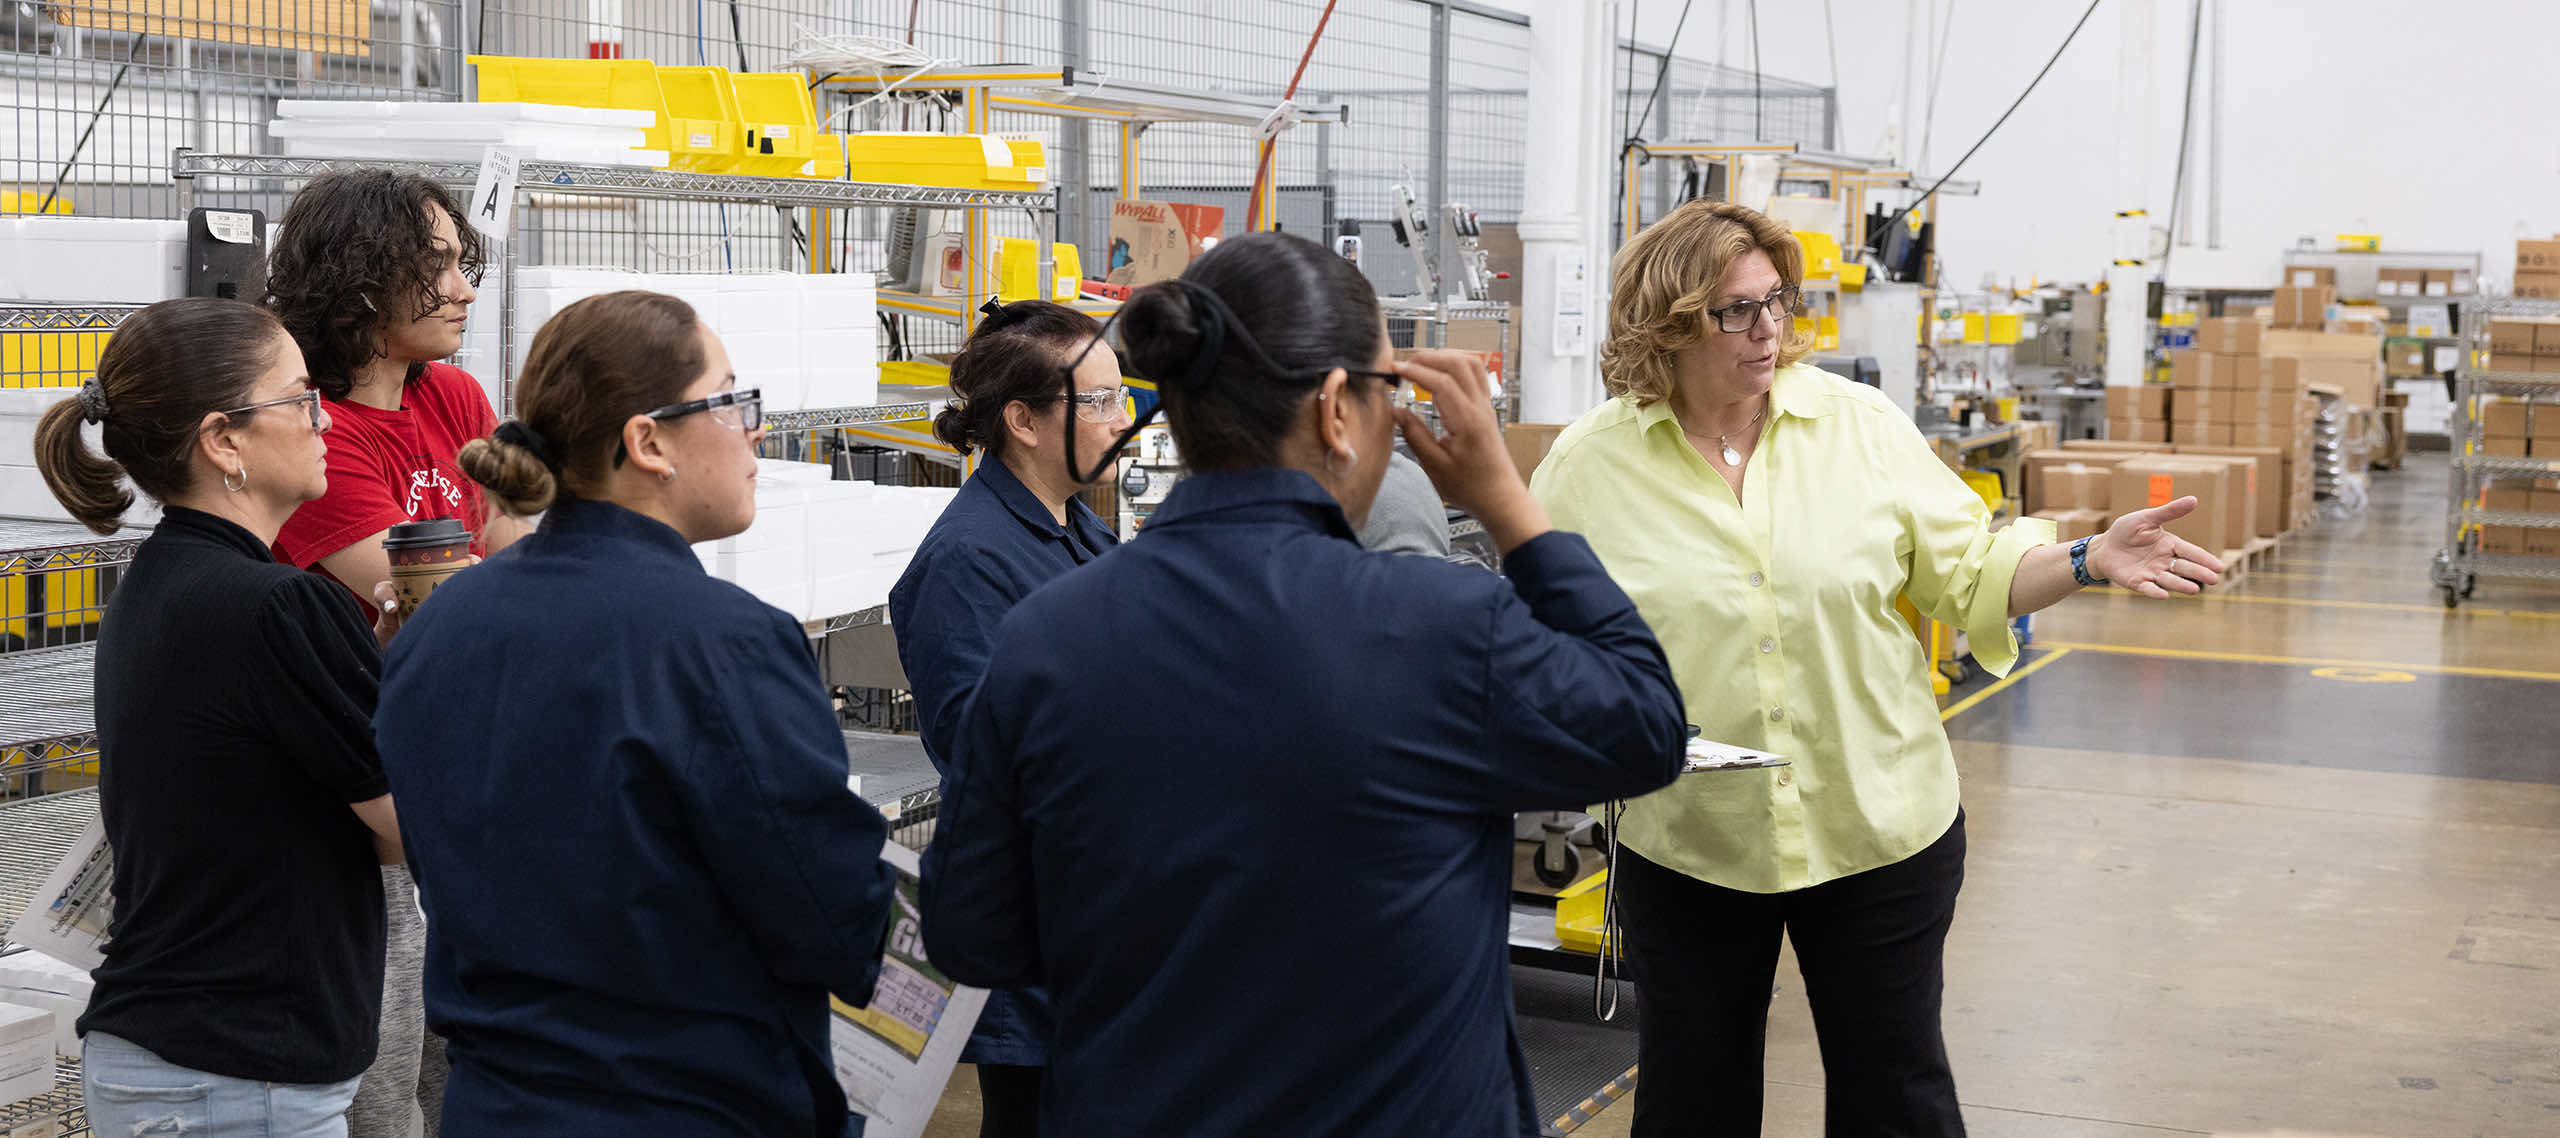 Associates participate in a gemba walk on the factory floor